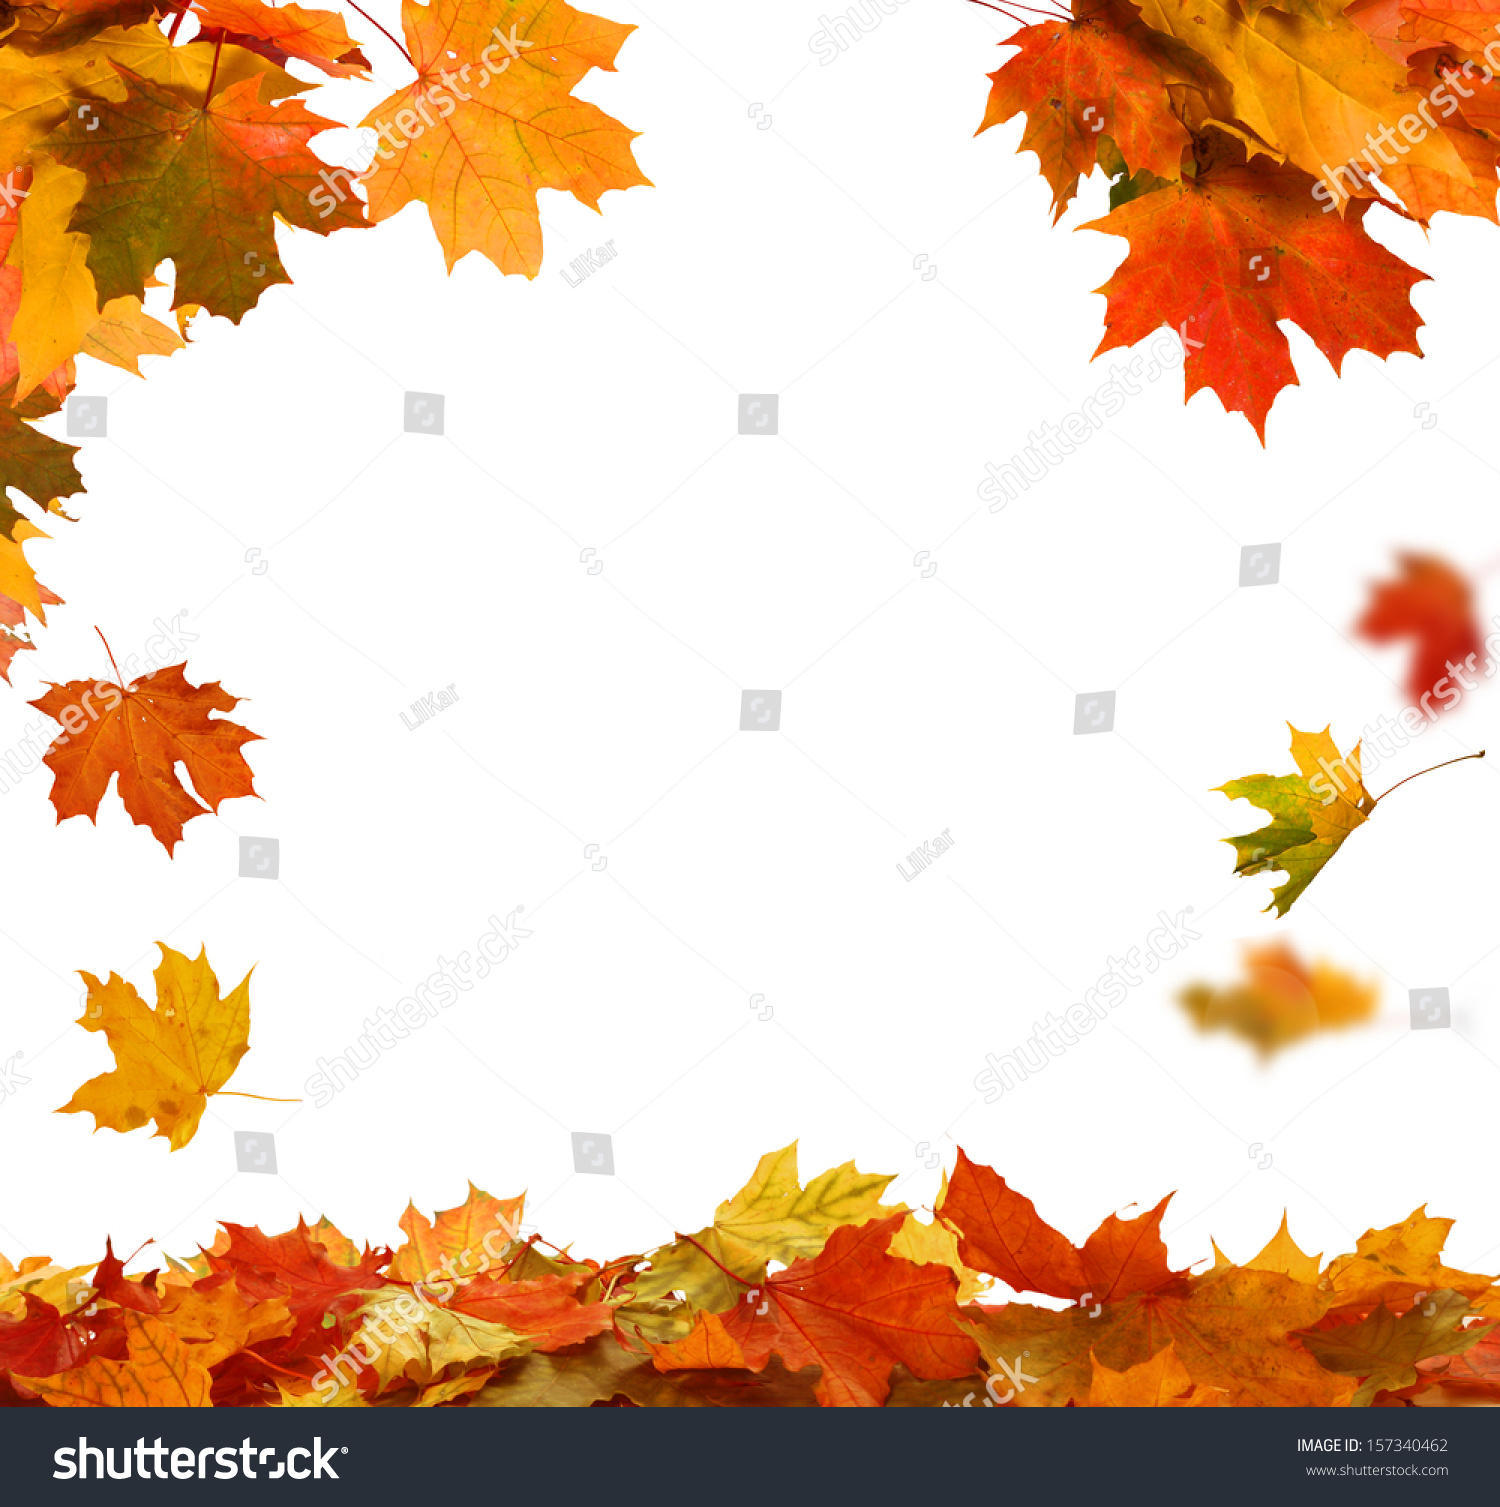 PowerPoint Template: fall leaves border - isolated (imoklhlnj)